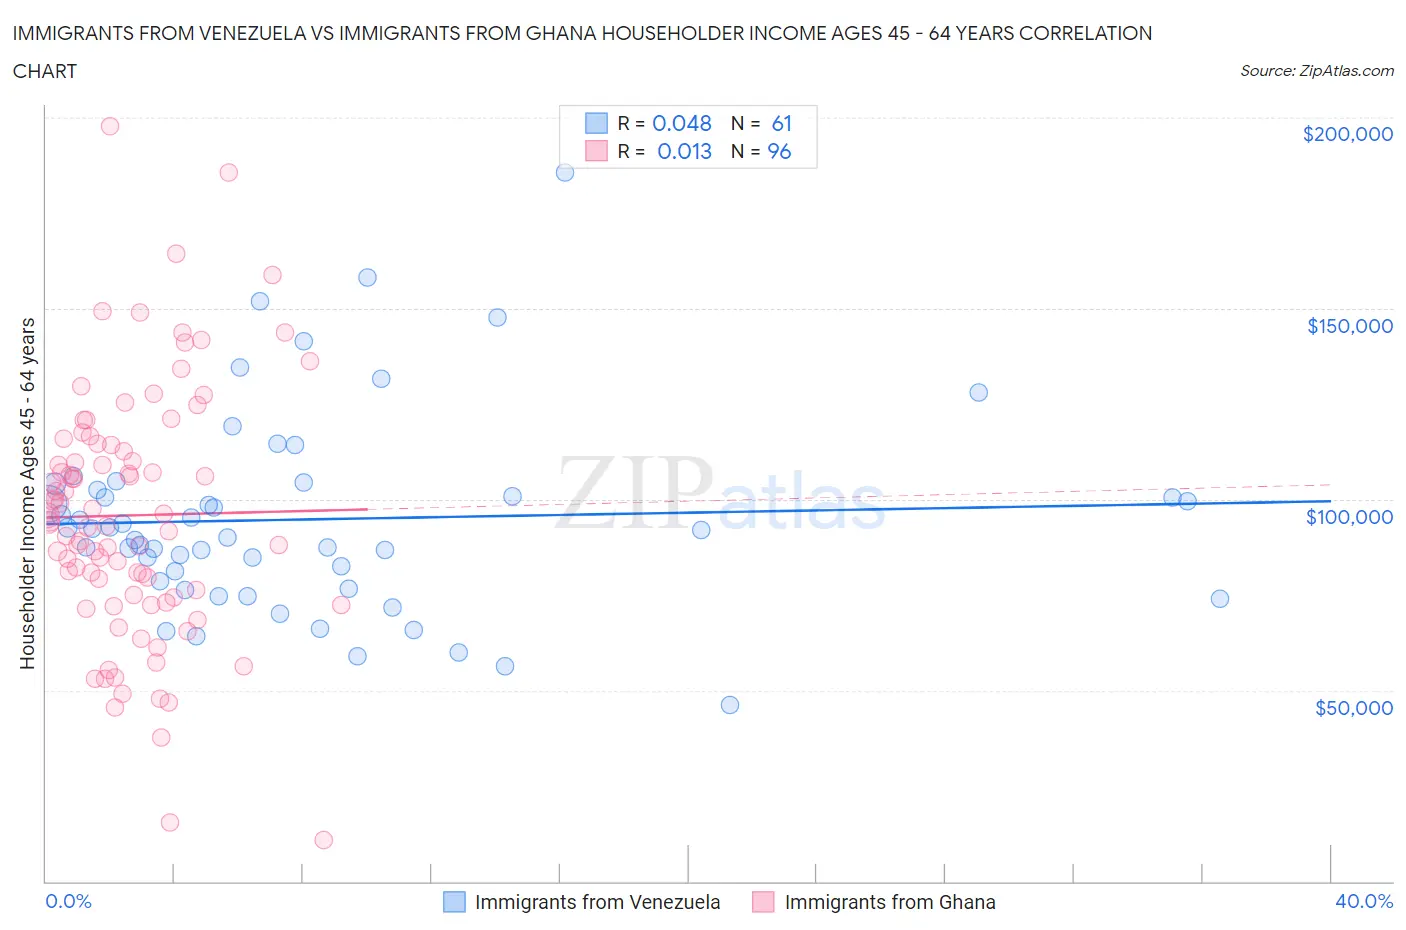 Immigrants from Venezuela vs Immigrants from Ghana Householder Income Ages 45 - 64 years